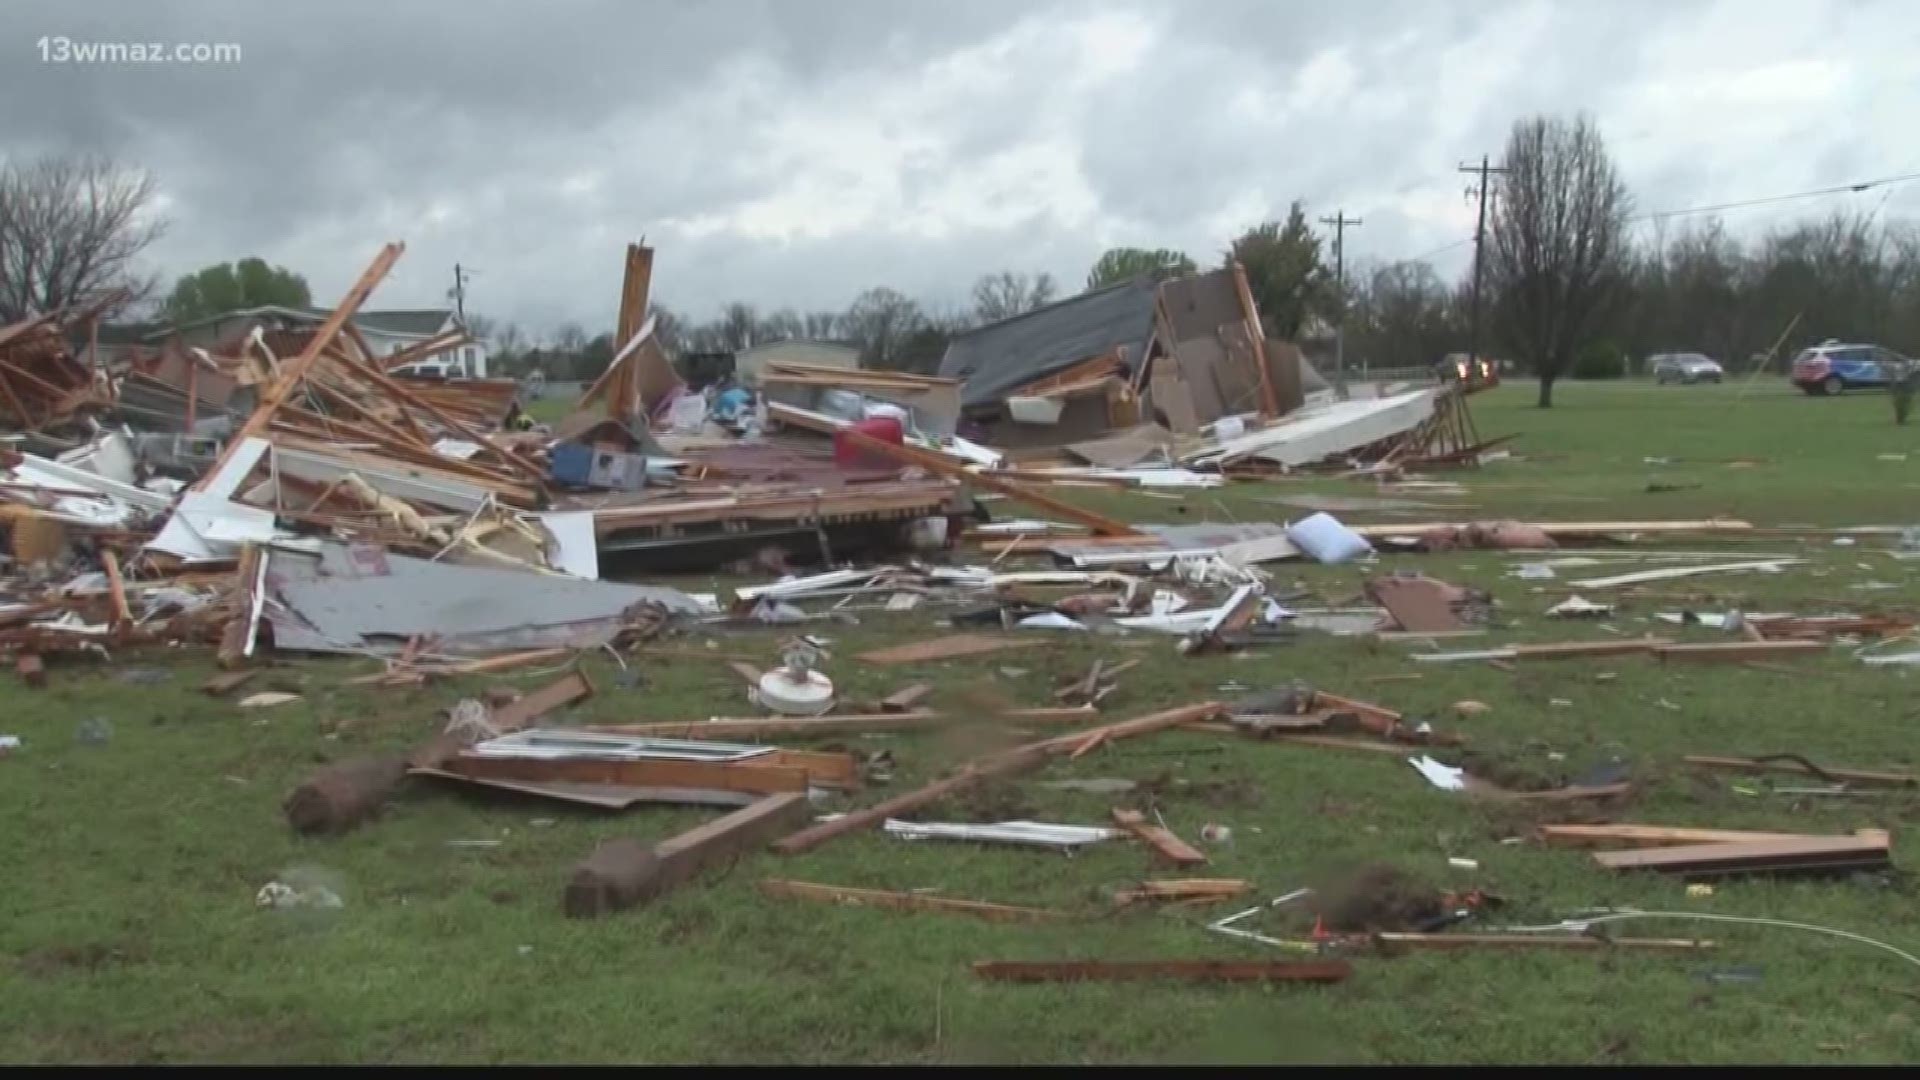 As National Weather Service survey teams continue reviewing damage from Sunday’s severe weather across the southeast, they’ve confirmed at least 8 tornadoes affected Central Georgia.